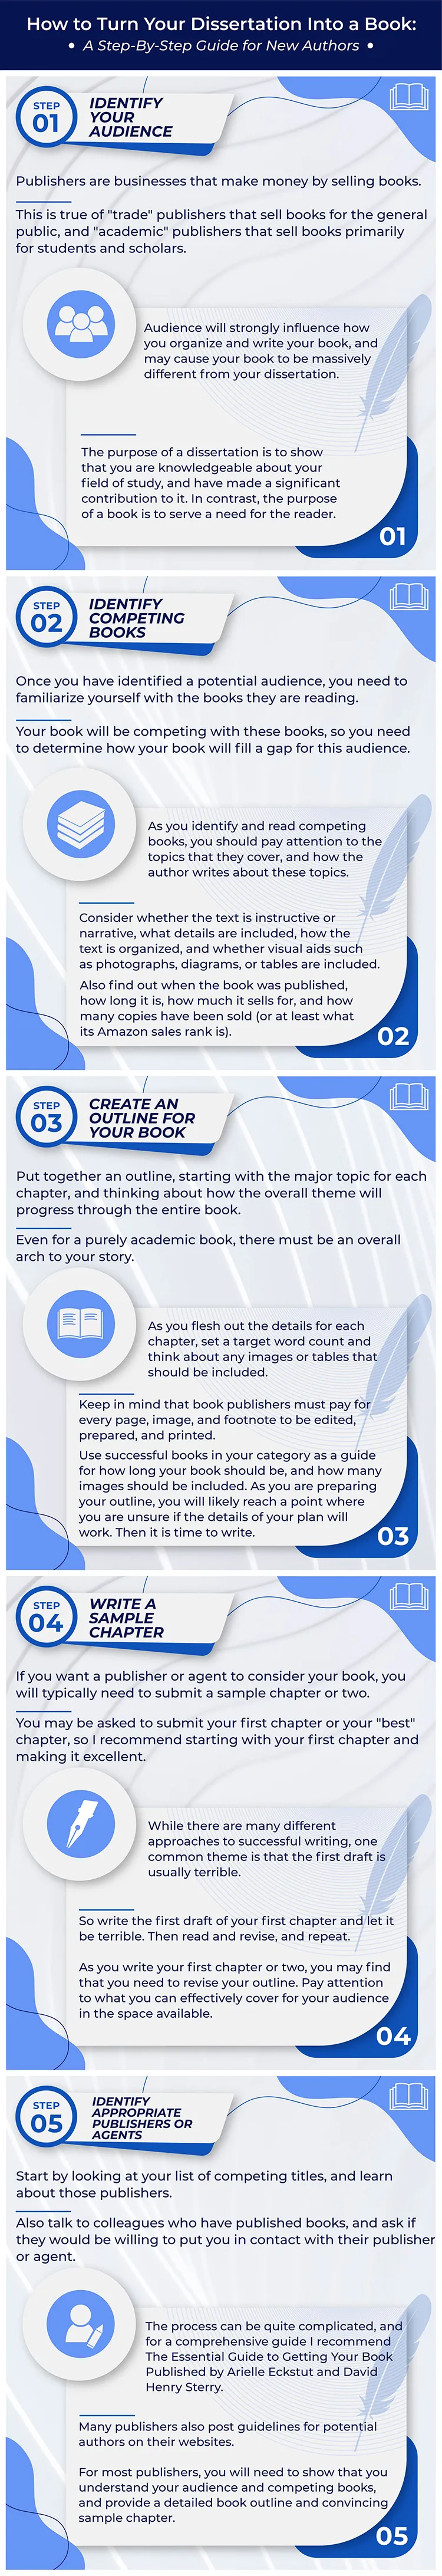 Dissertation Into a Book Infographic